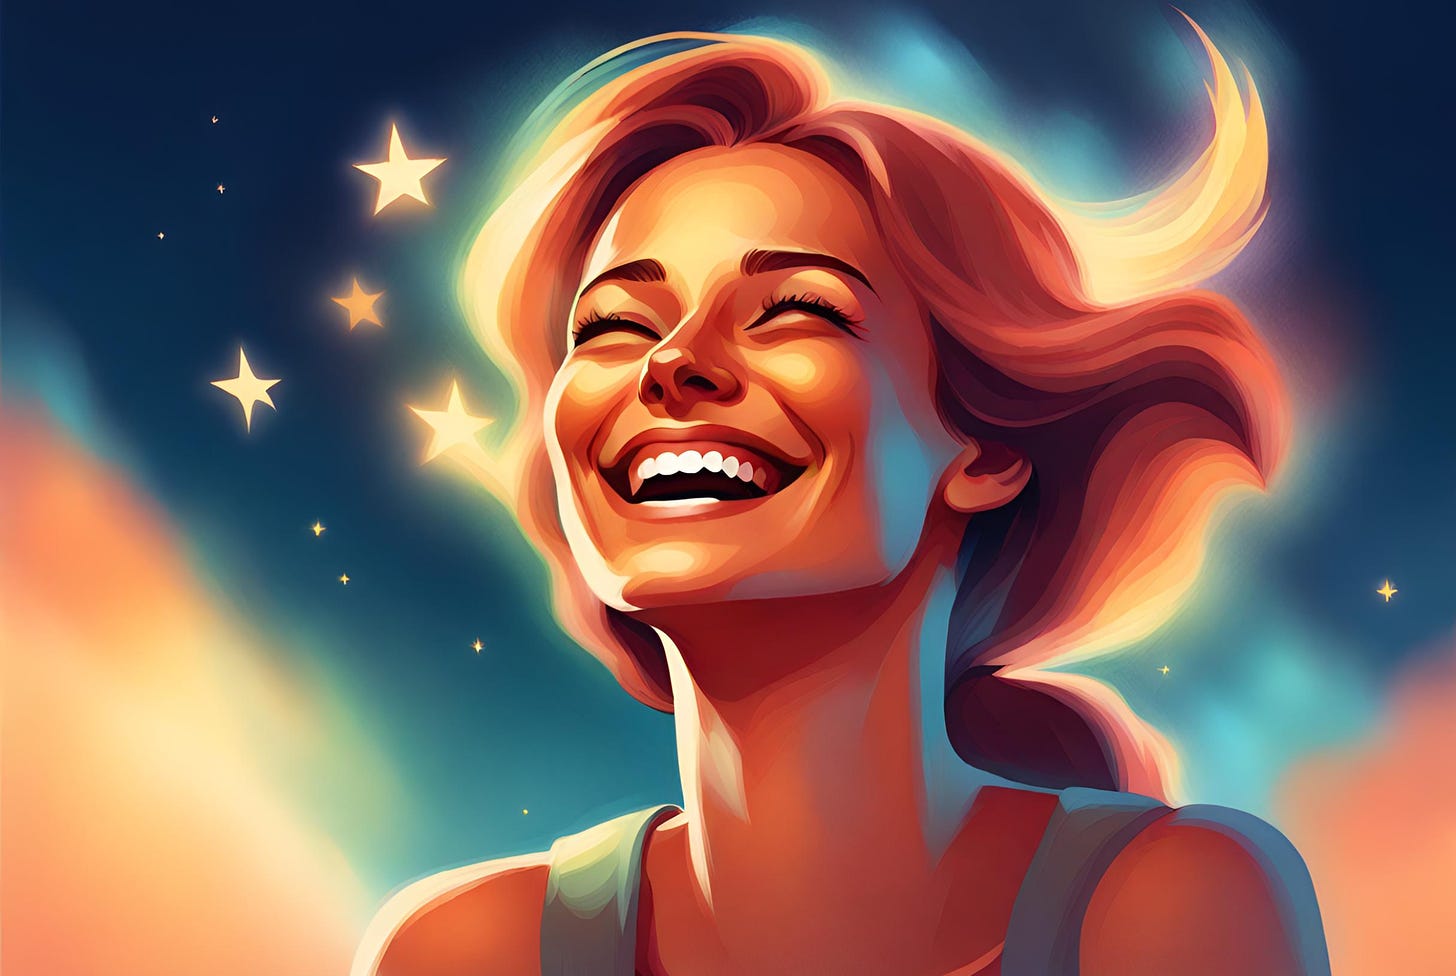 Illustration of a smiling woman thinking about a past victory